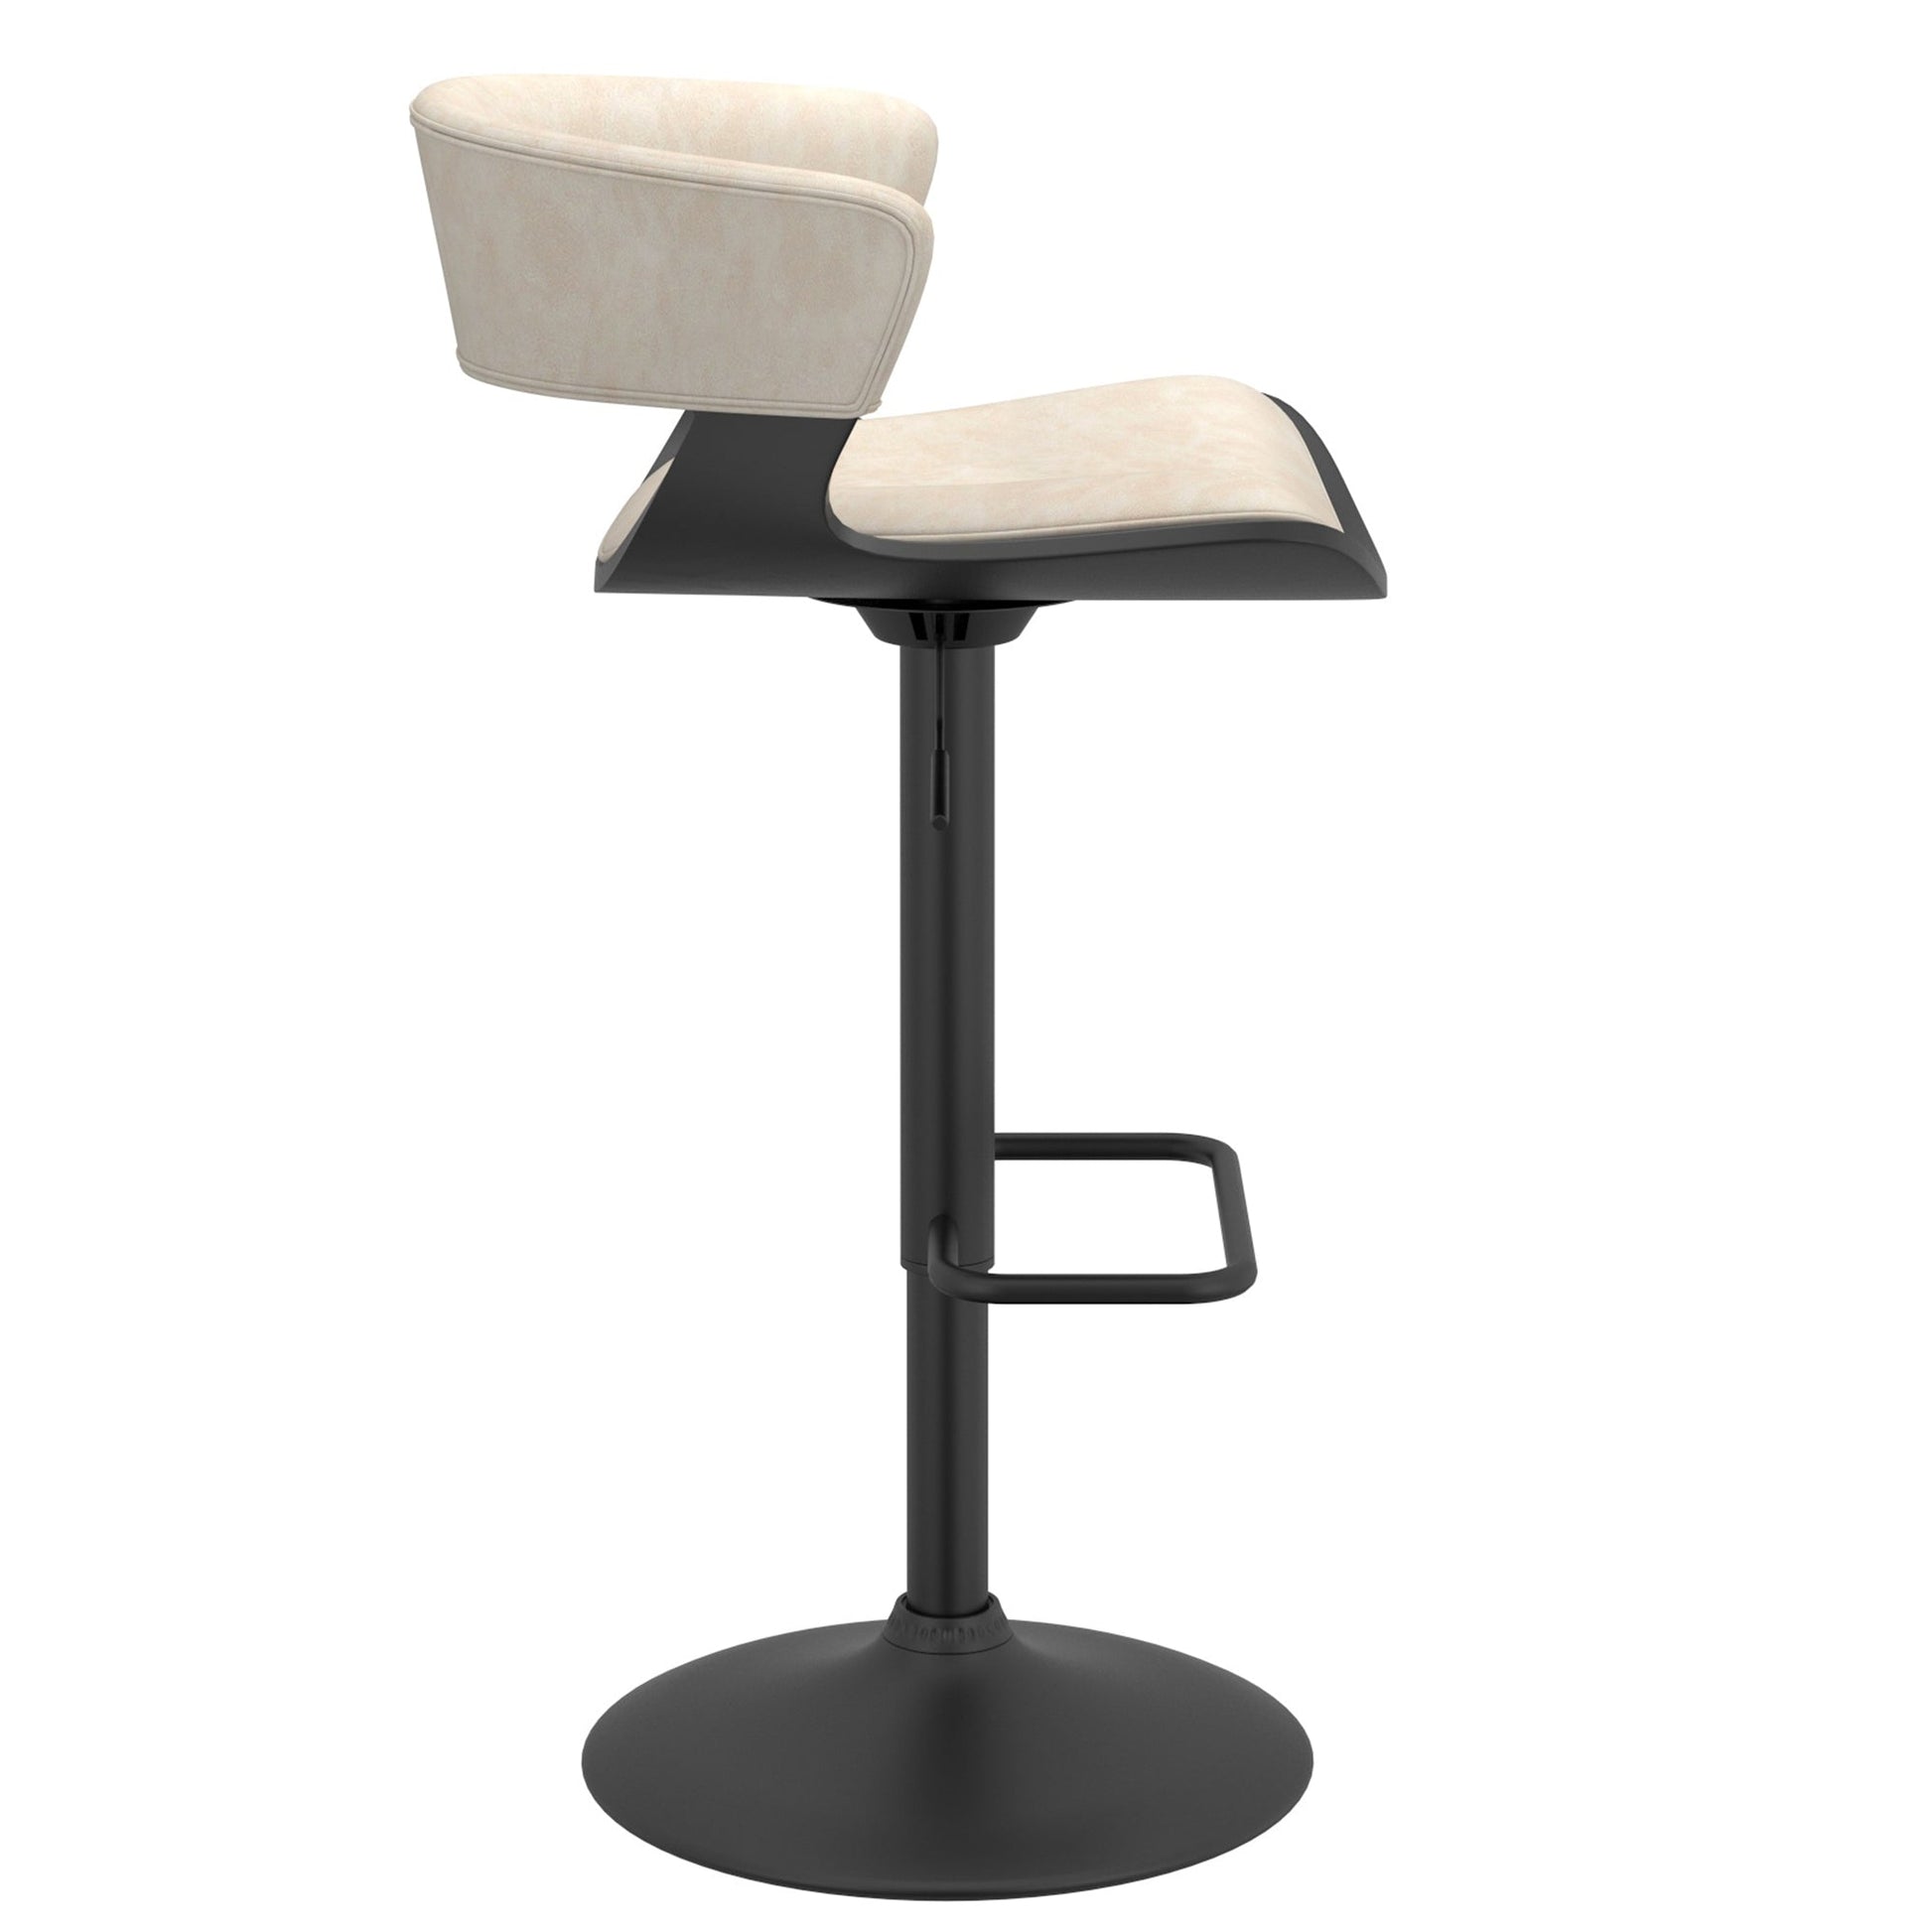 Height Adjustable Bar Stools | Set of 2 | Rover Cream - Your Bar Stools Canada